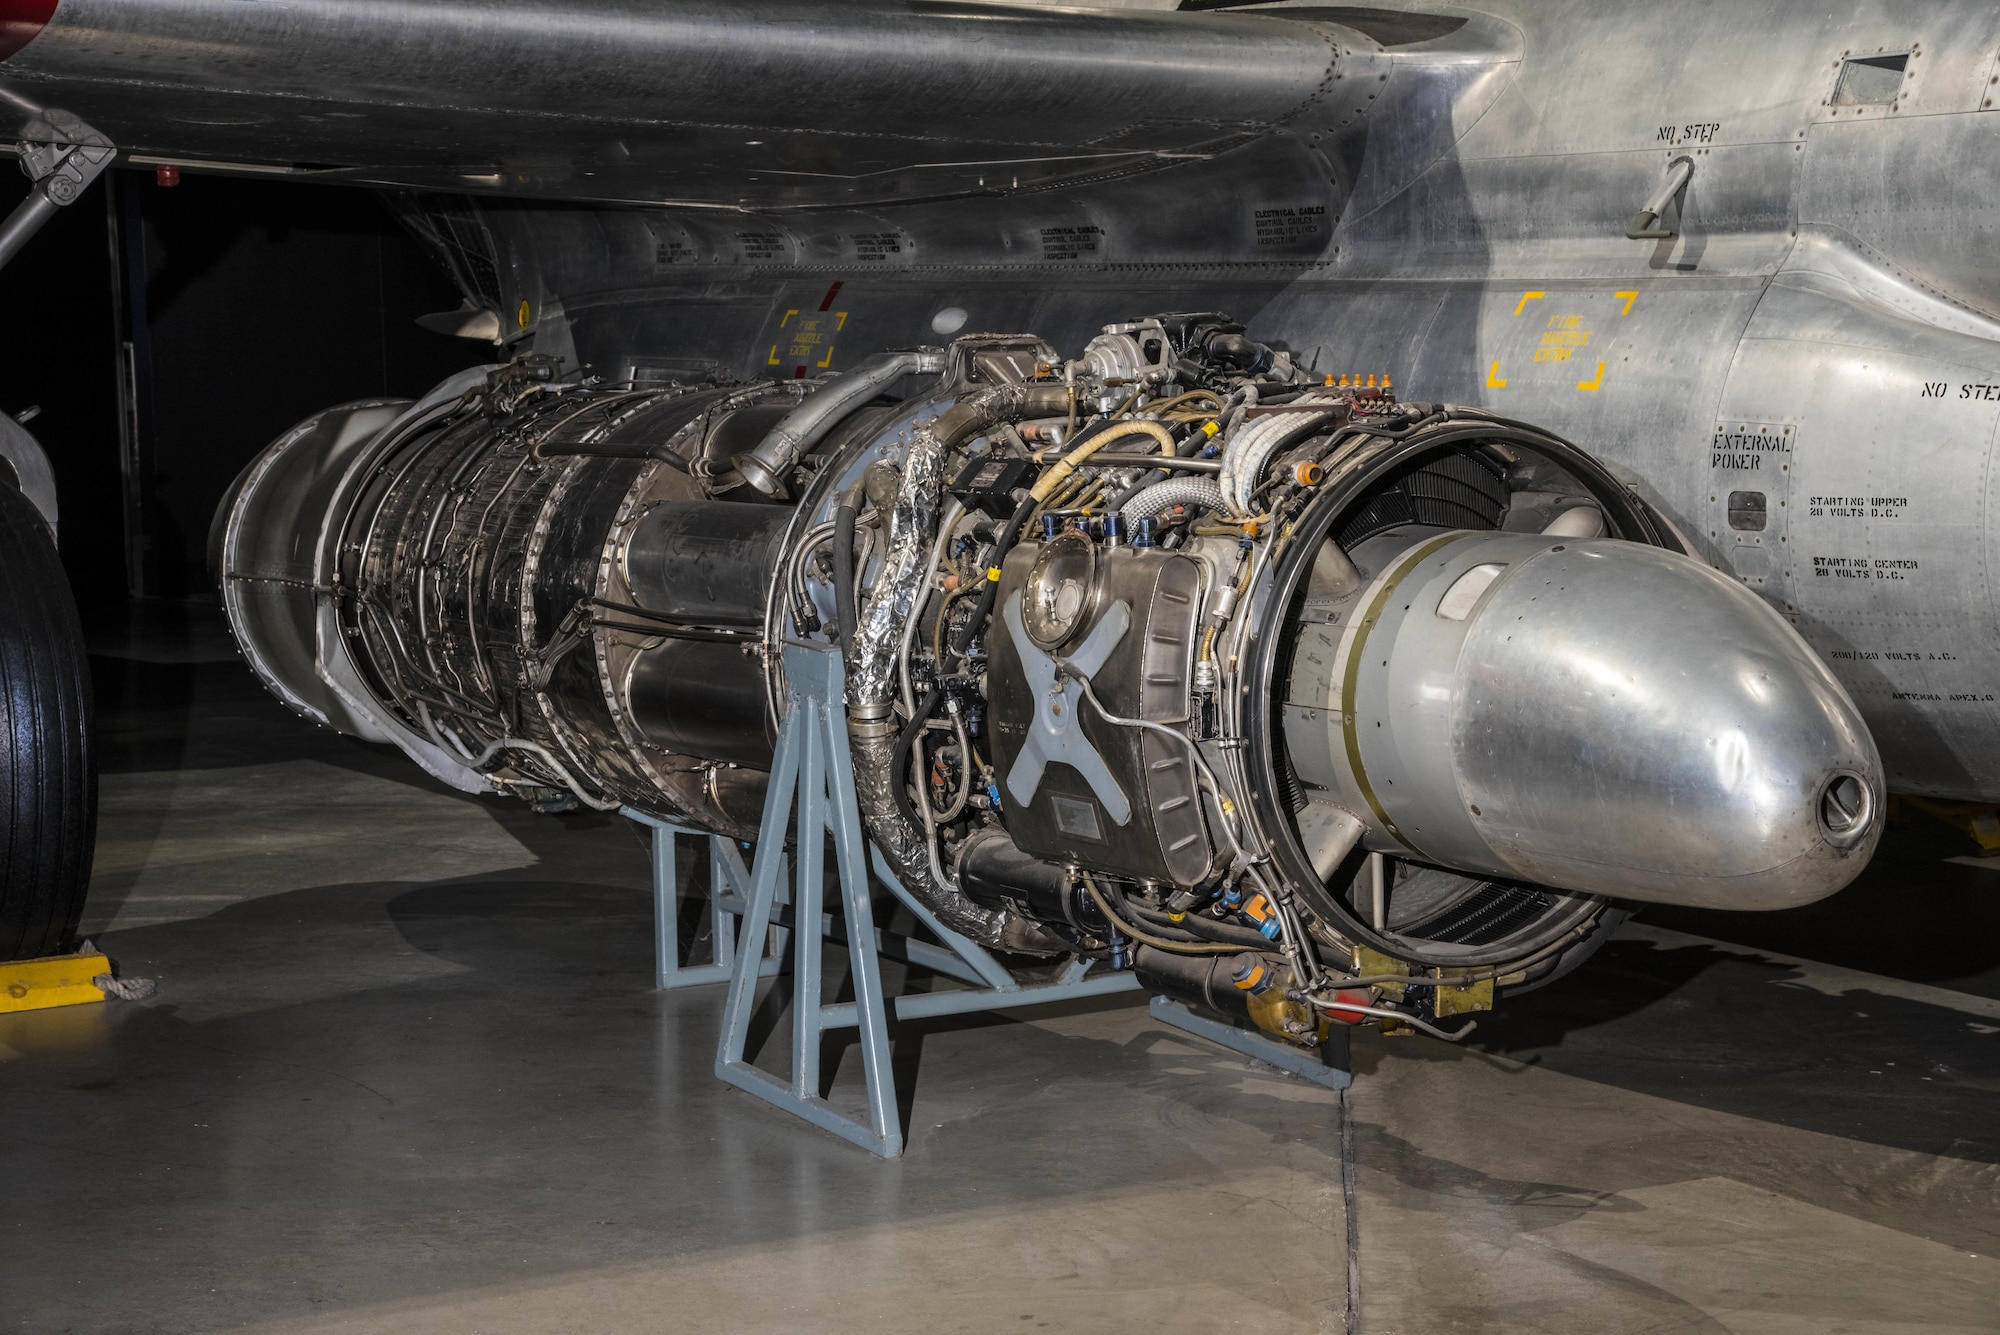 DAYTON, Ohio - The Allison J35-A-35A Turbojet engine on display beneath the F-89J in the Cold War Gallery at the National Museum of the U.S. Air Force. (U.S. Air Force photo by Ken LaRock)

